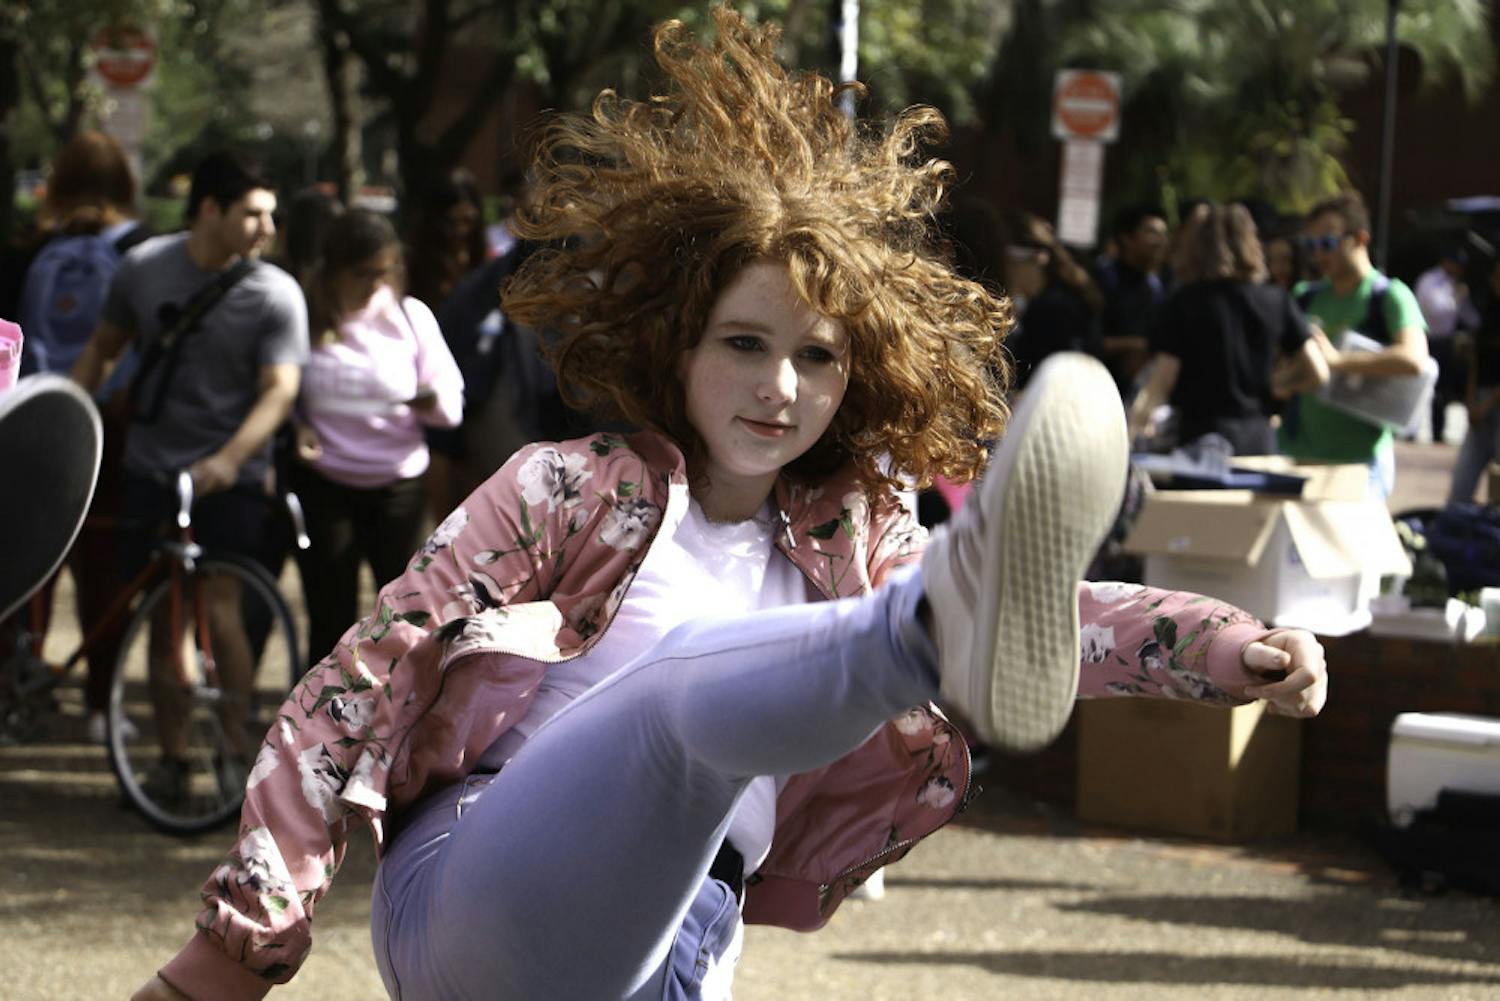 Genesis Dance Crew, UF's first K-pop cover group, performs in Turlington Plaza on Wednesday afternoon.